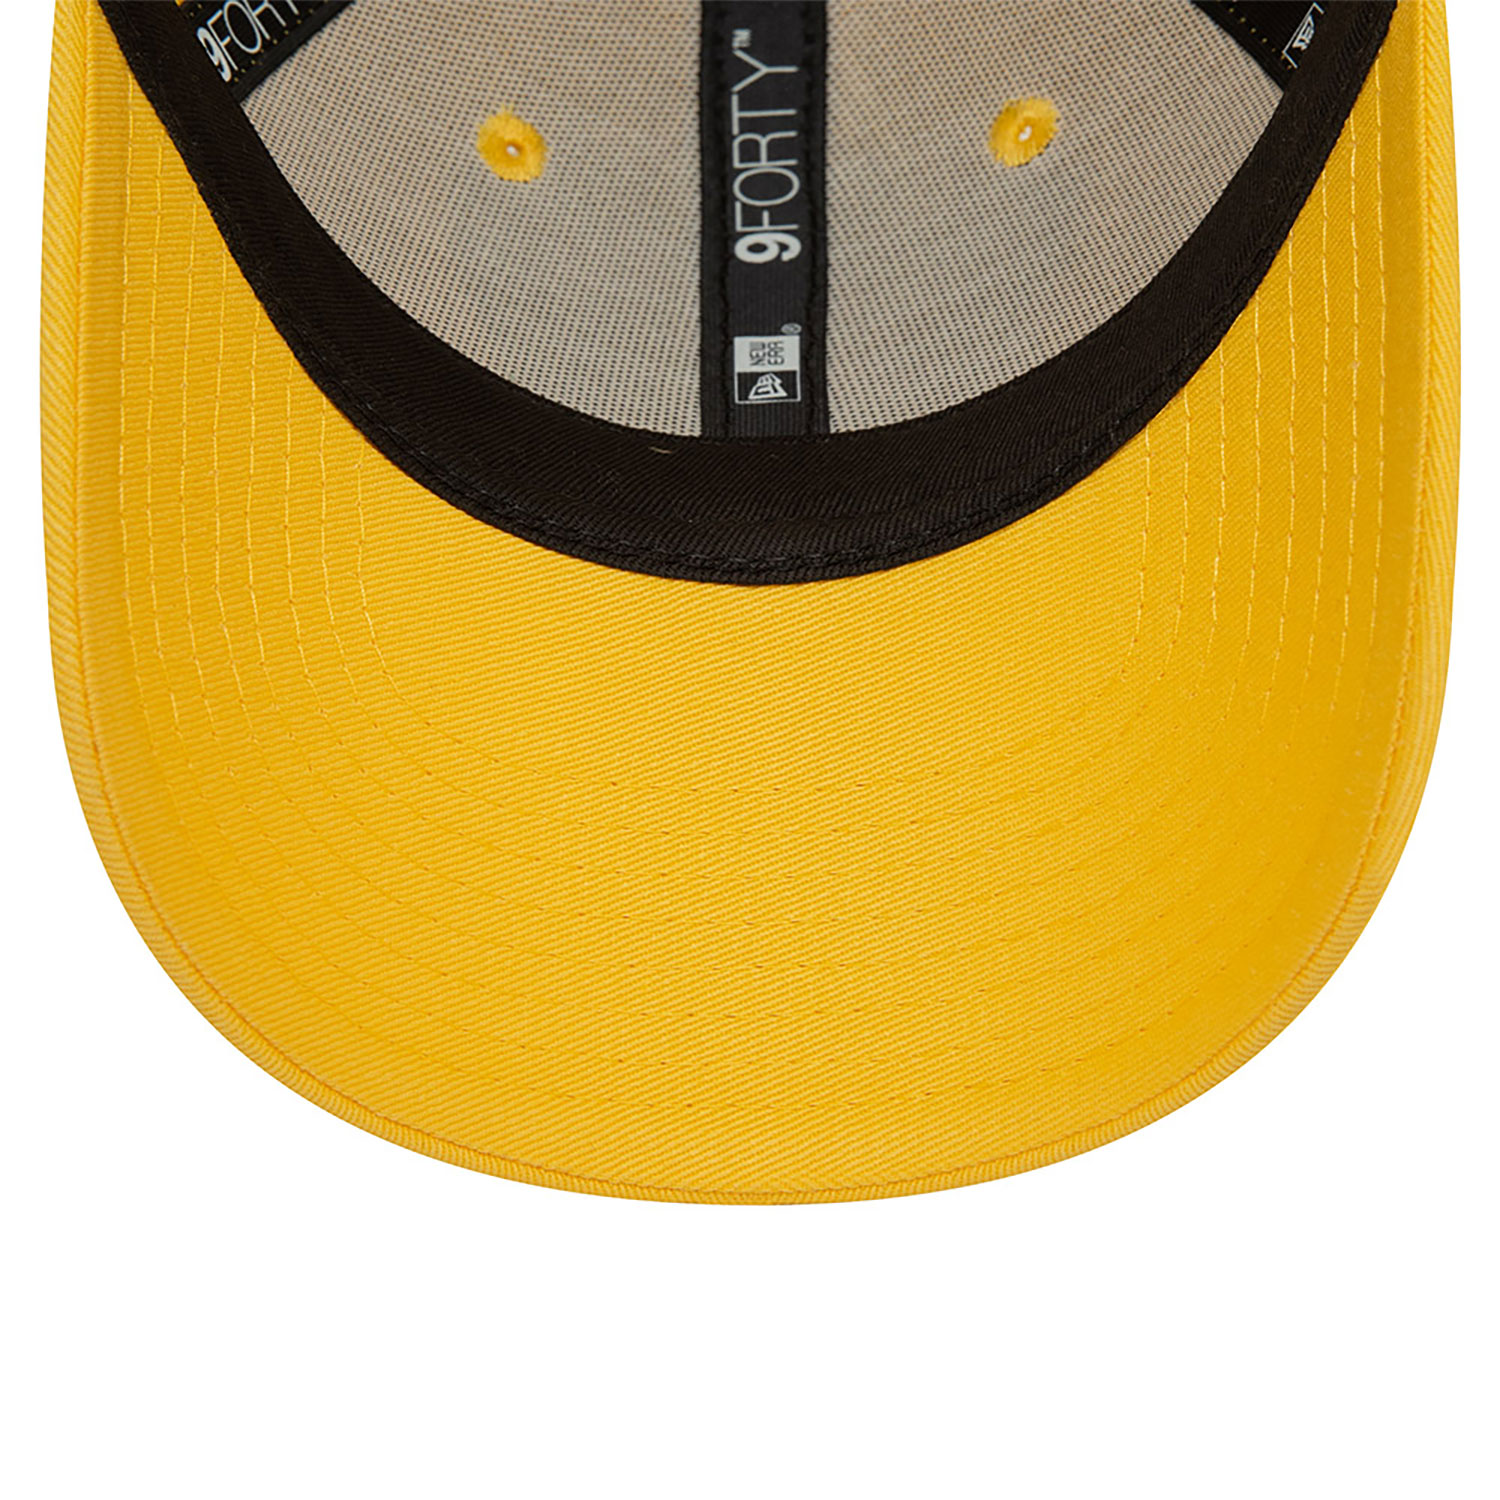 New Era Youth Essential Yellow 9FORTY Adjustable Cap